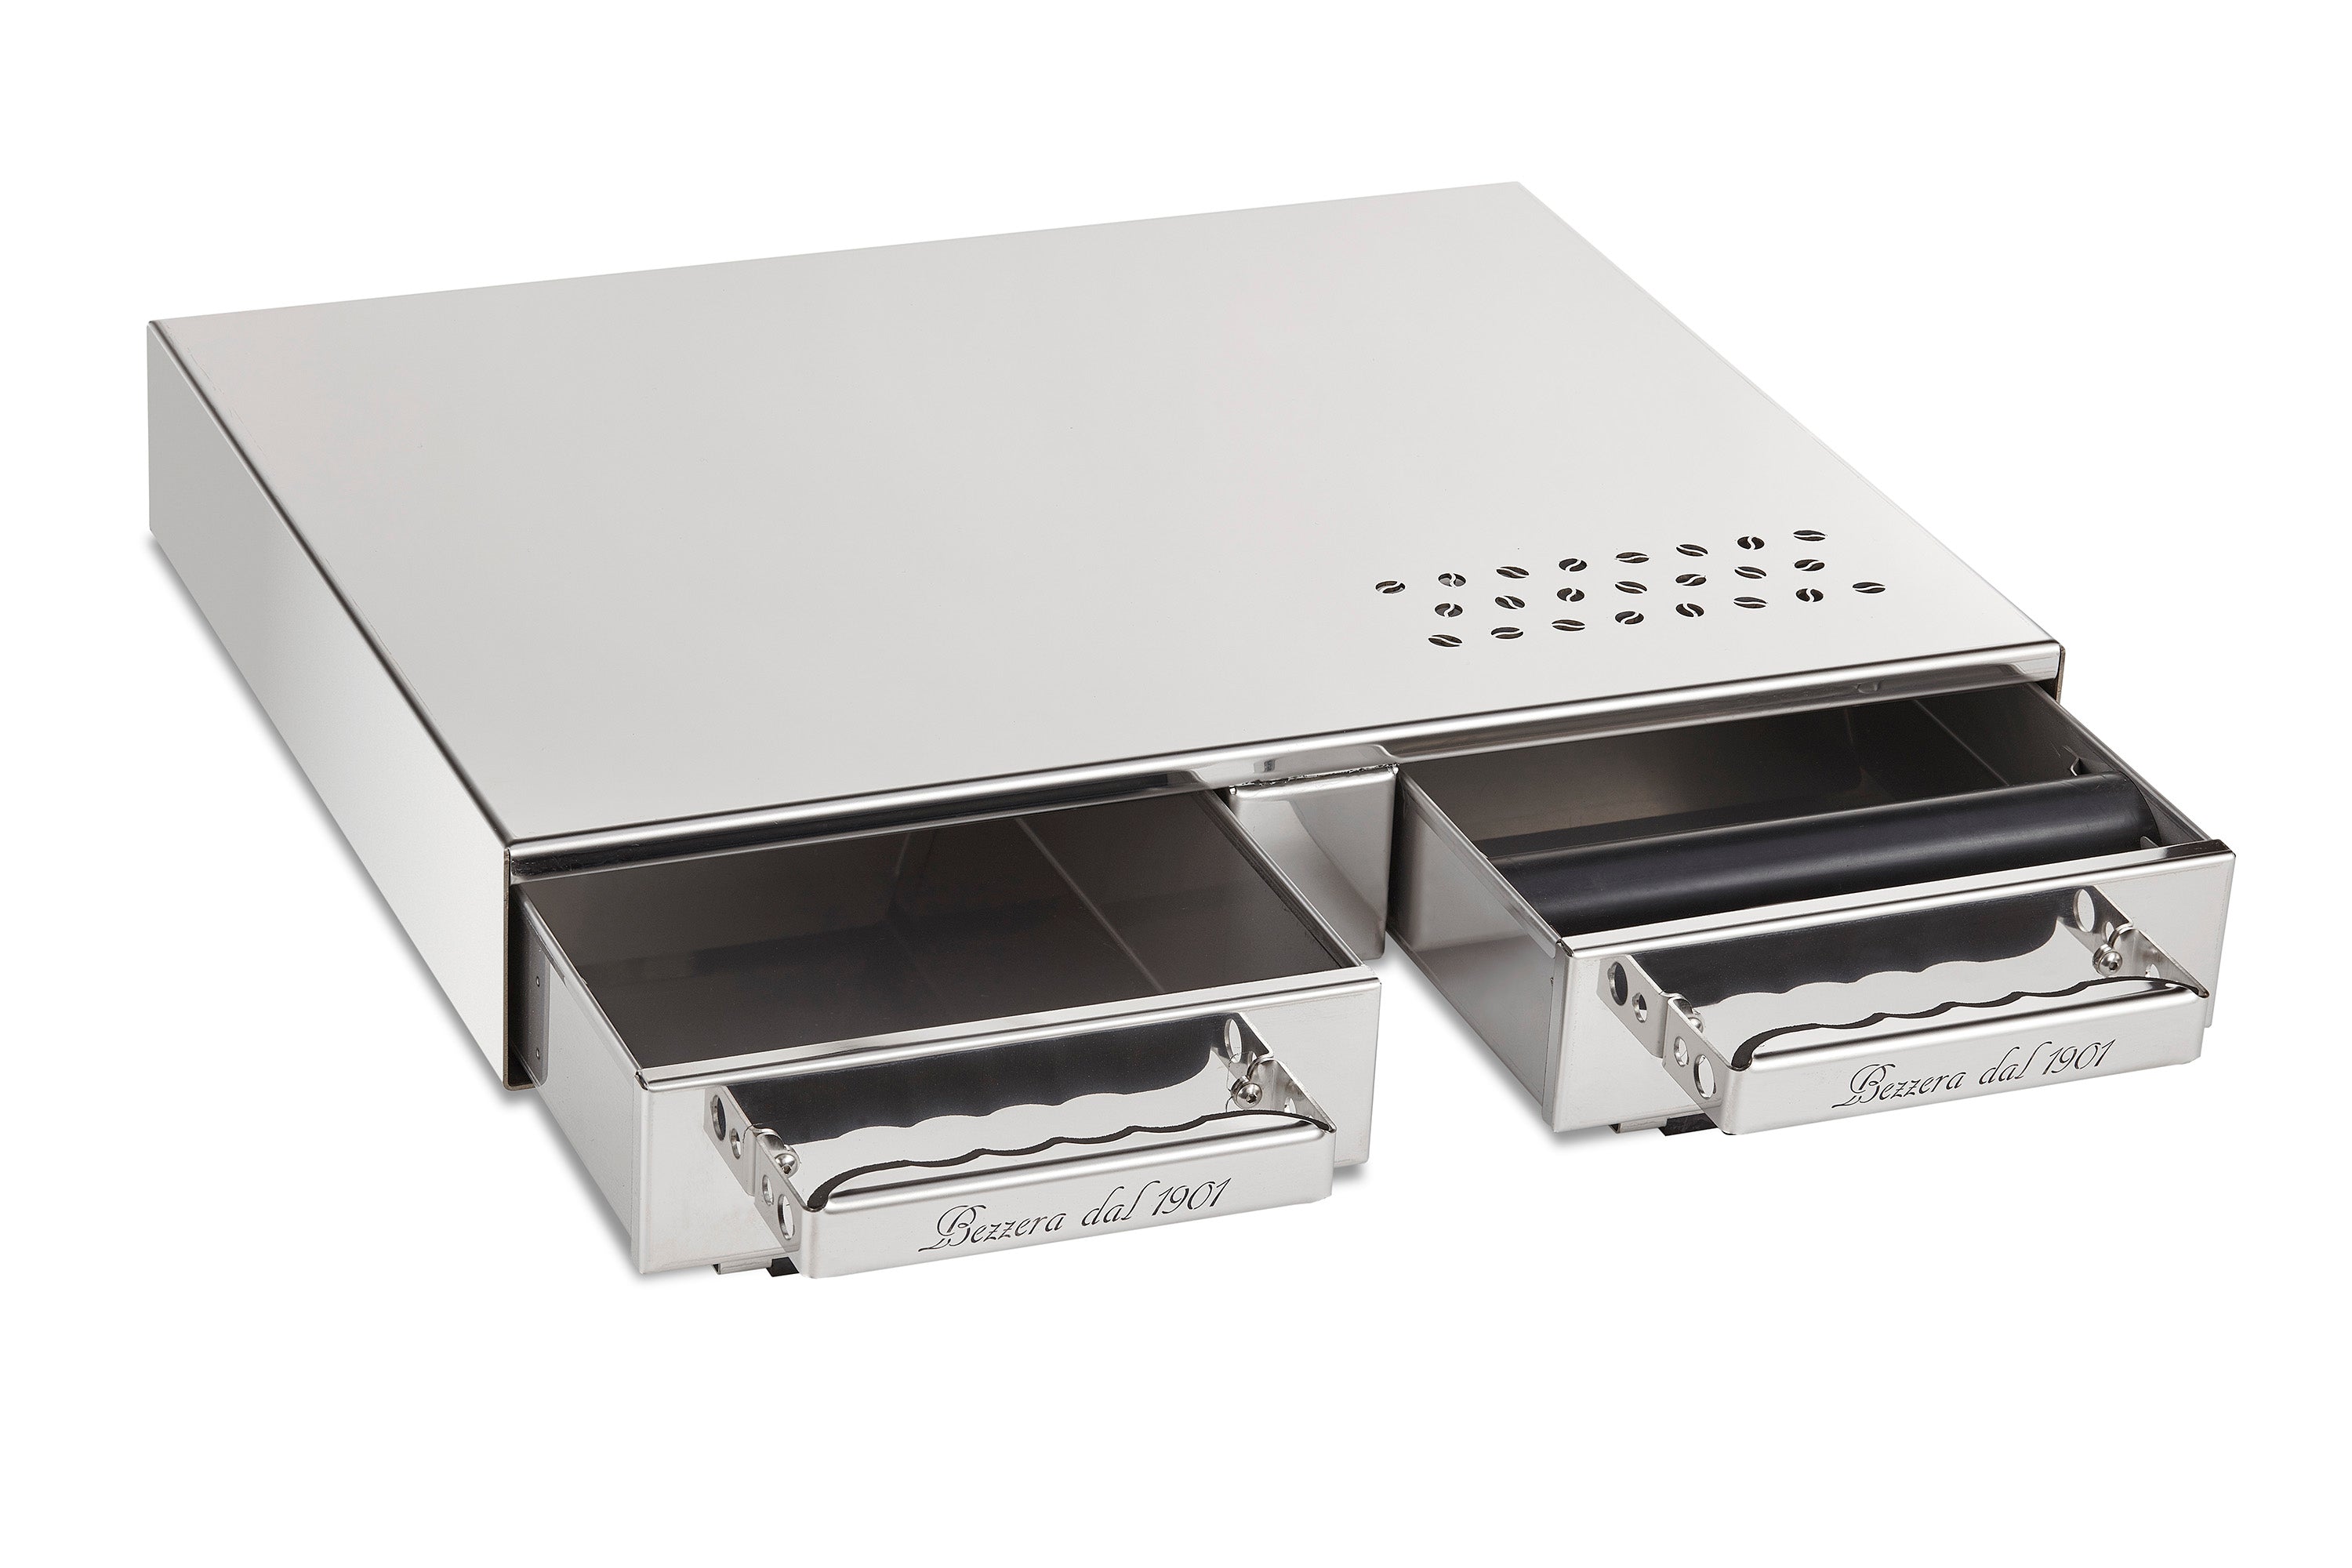 CF0480CS2 - Base with 2 Drawers for Espresso Machines